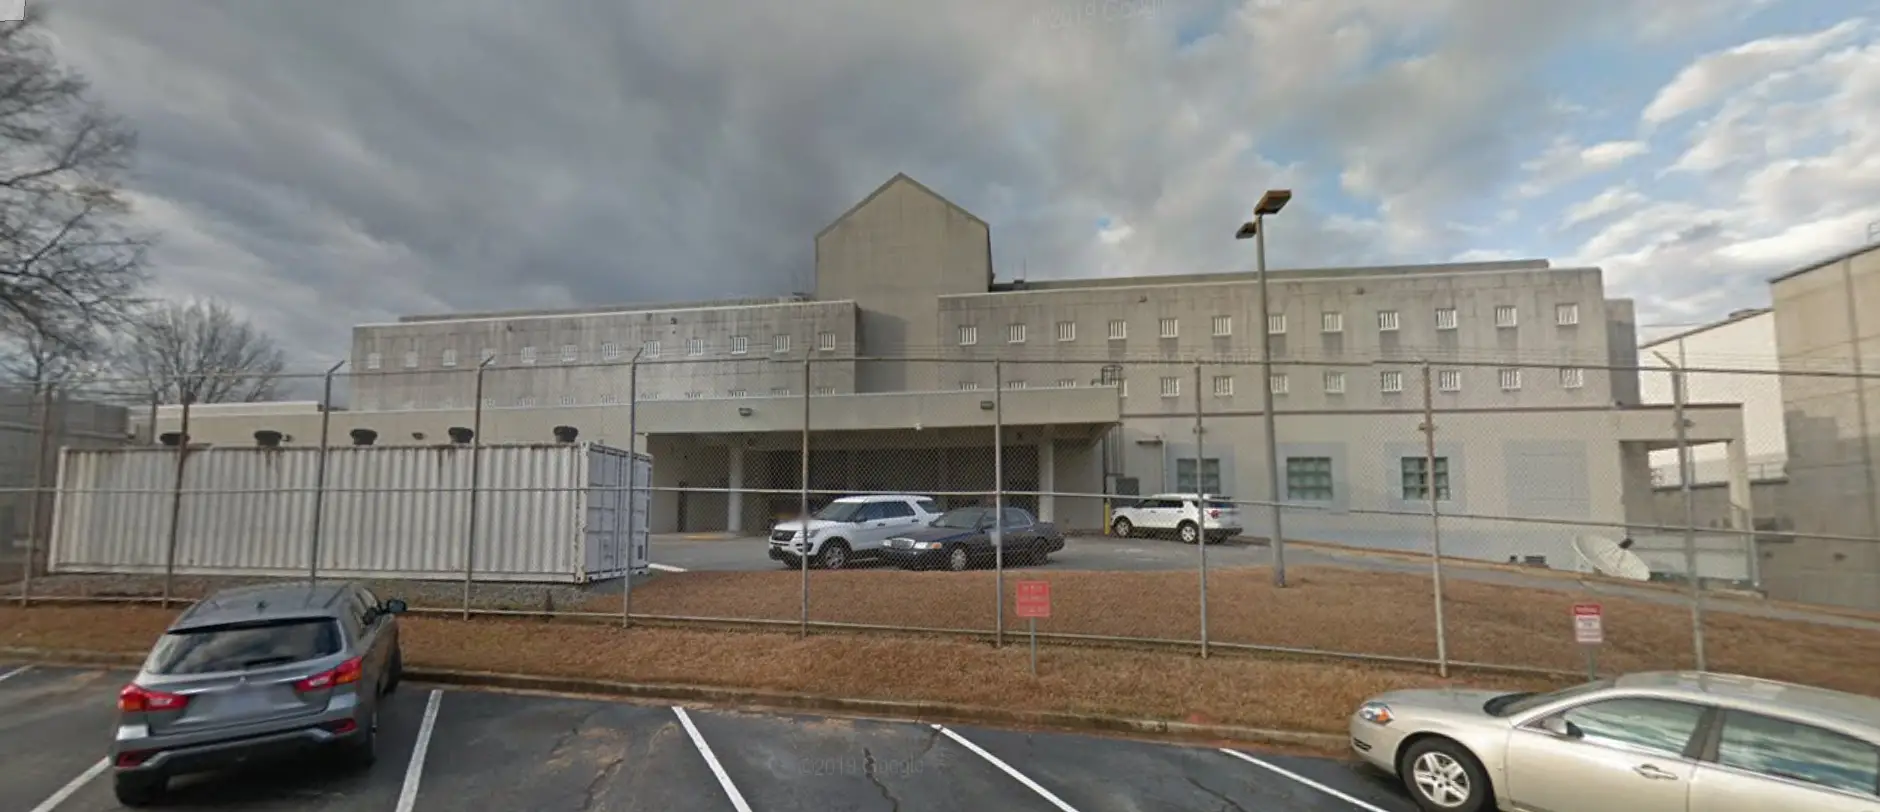 Greenville County Detention Center SC Booking, Visiting, Calls, Phone